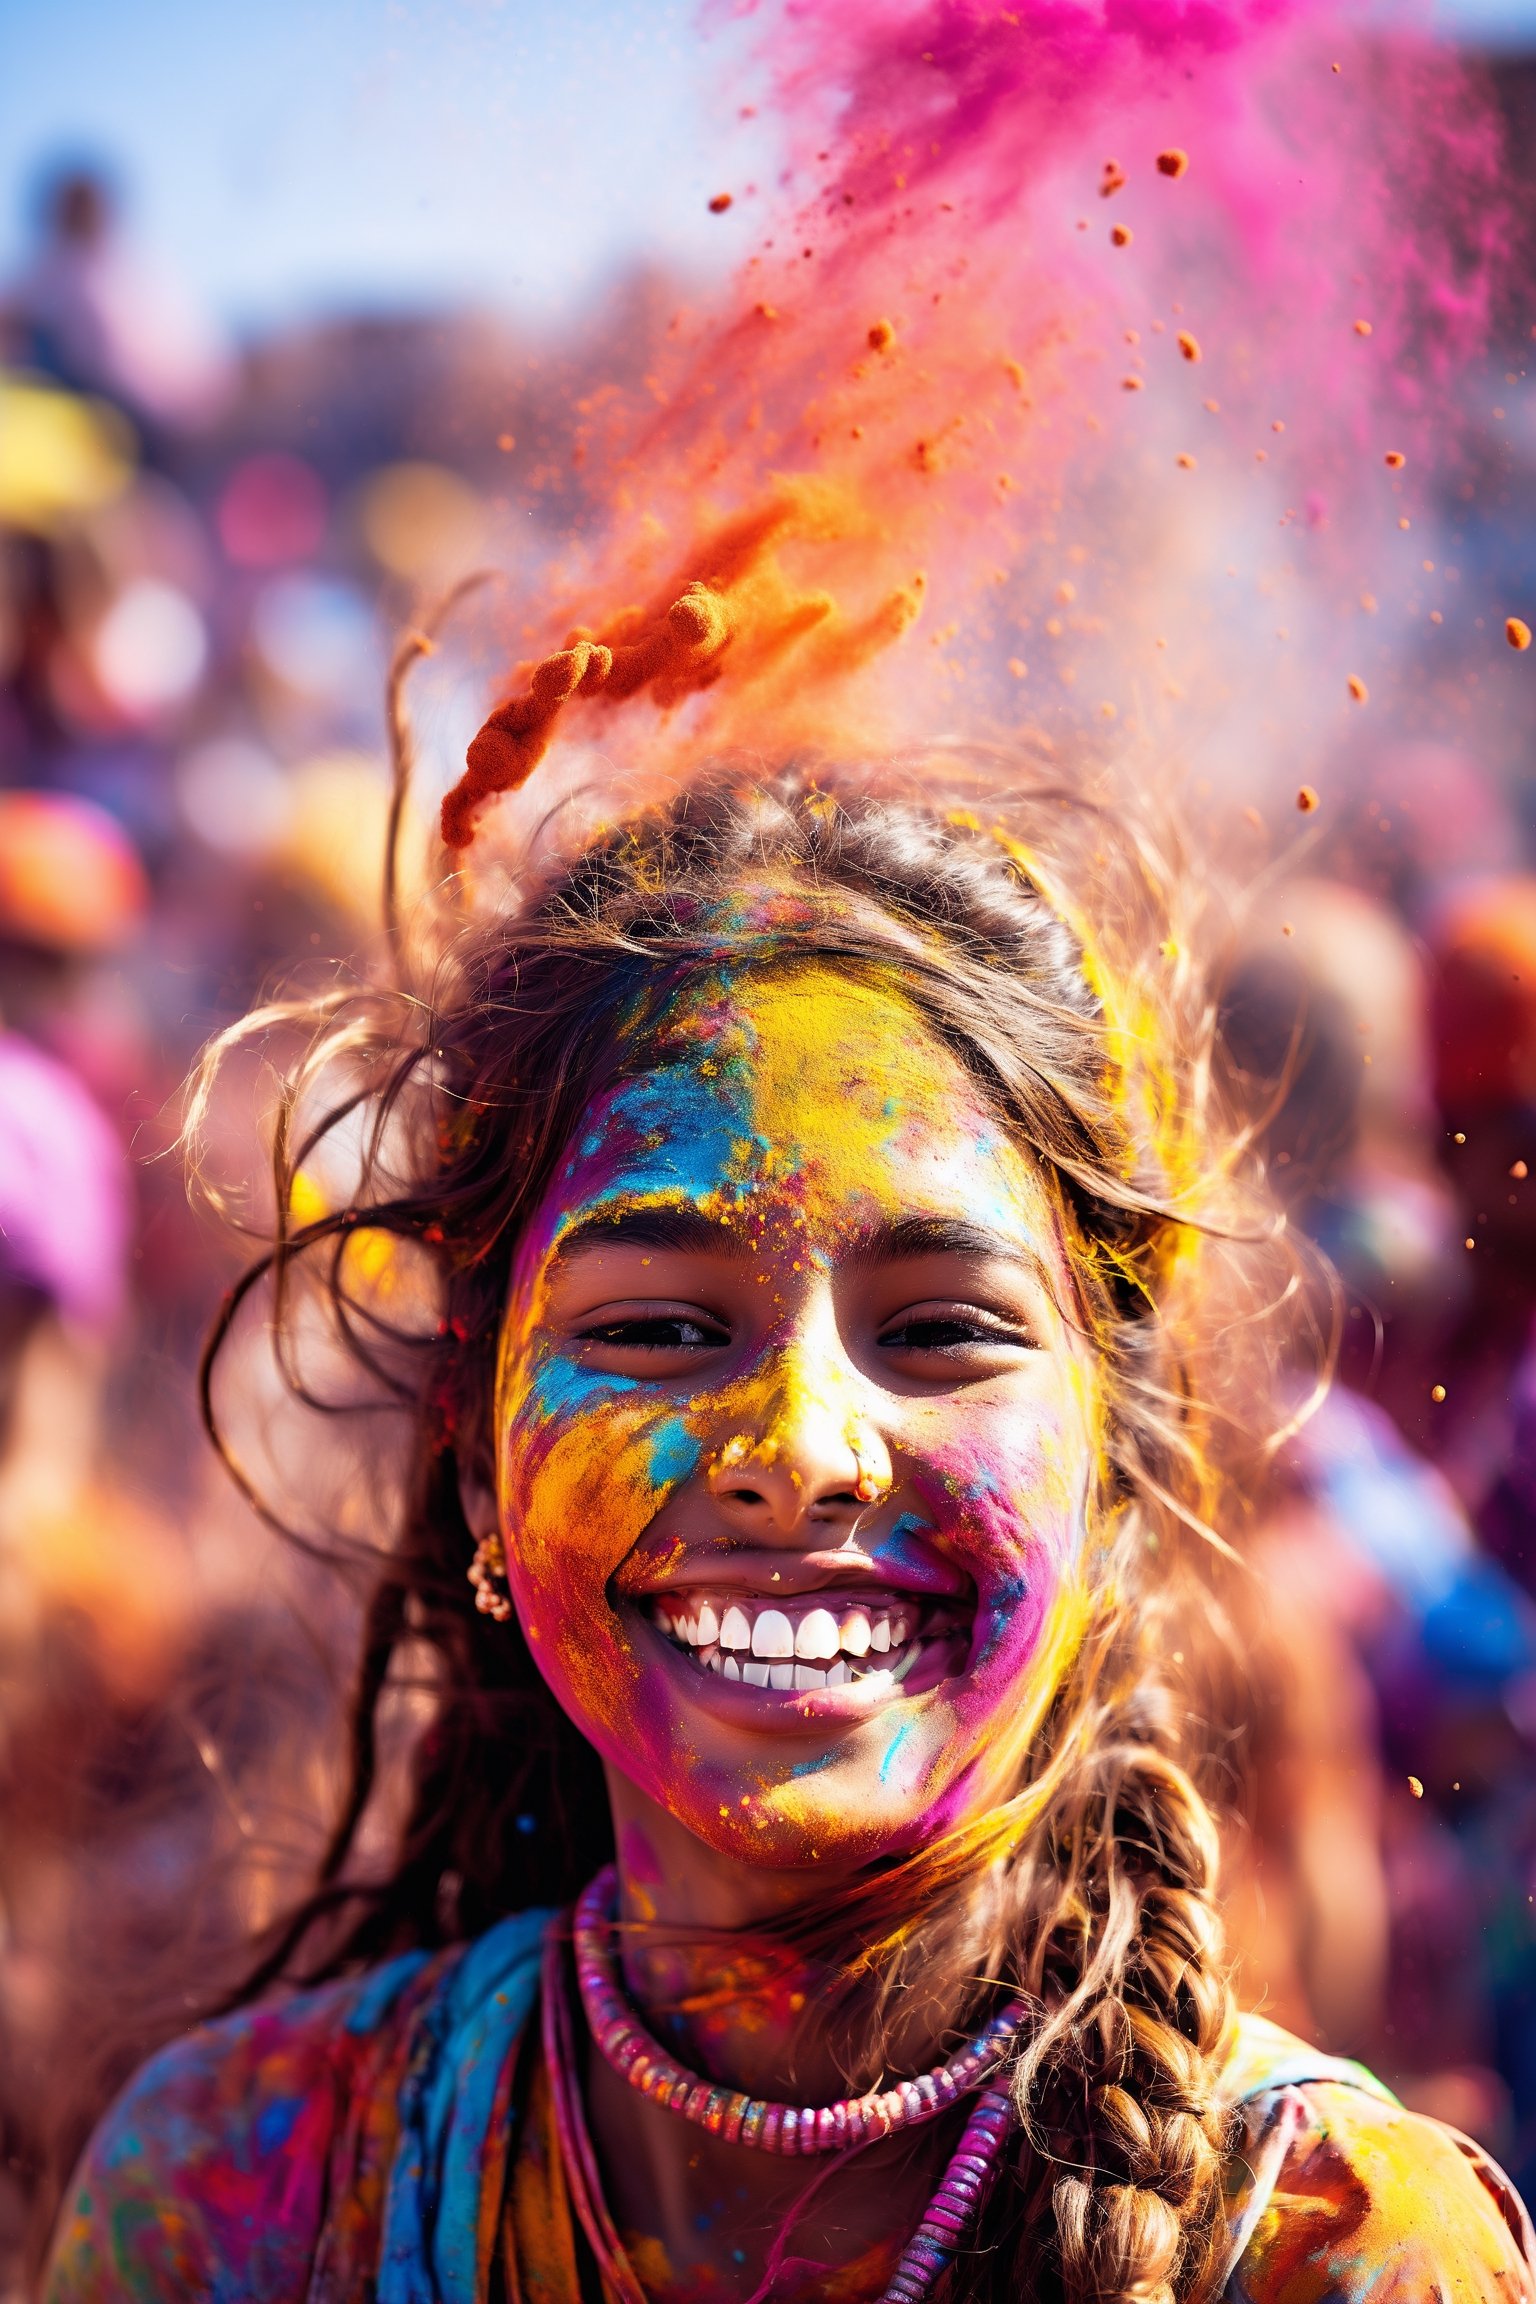  young girl immersed in the joy of the Holi festival in India. Picture her wearing a traditional and brightly colored salwar kameez, her hands and face covered in an array of vibrant powdered pigments. Surround her with the dynamic energy of the festival, showcasing a background filled with people joyfully throwing colorful powders, creating a vivid and playful atmosphere. Optimize for a visually immersive composition that vividly captures the lively spirit and cultural richness of the Holi celebration,Goa